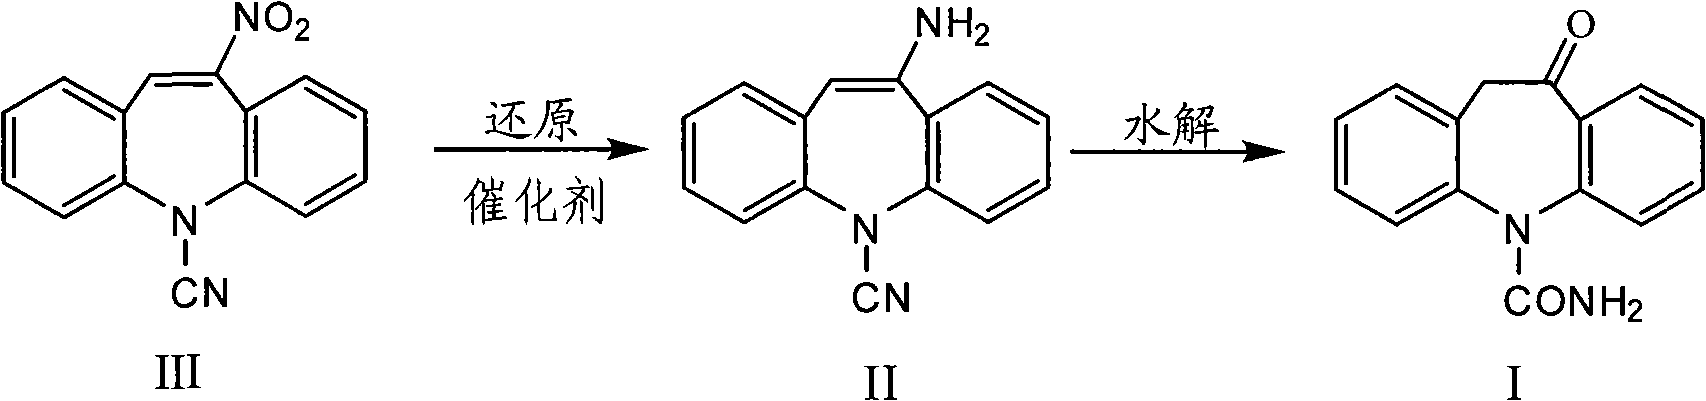 Chemical synthesis method for oxcarbazepine